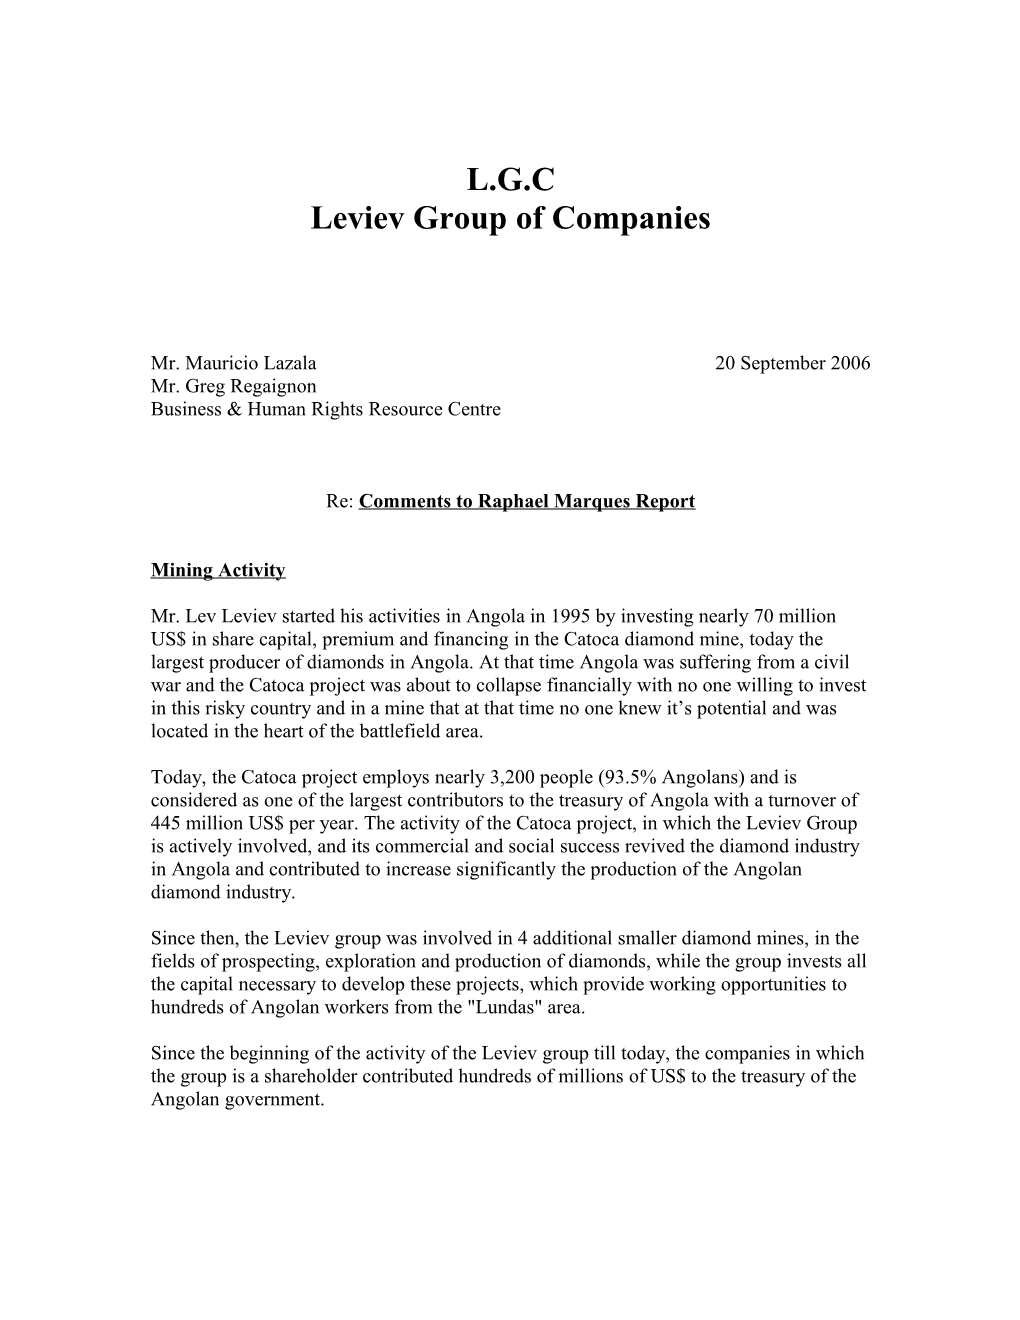 Leviev Group of Companies